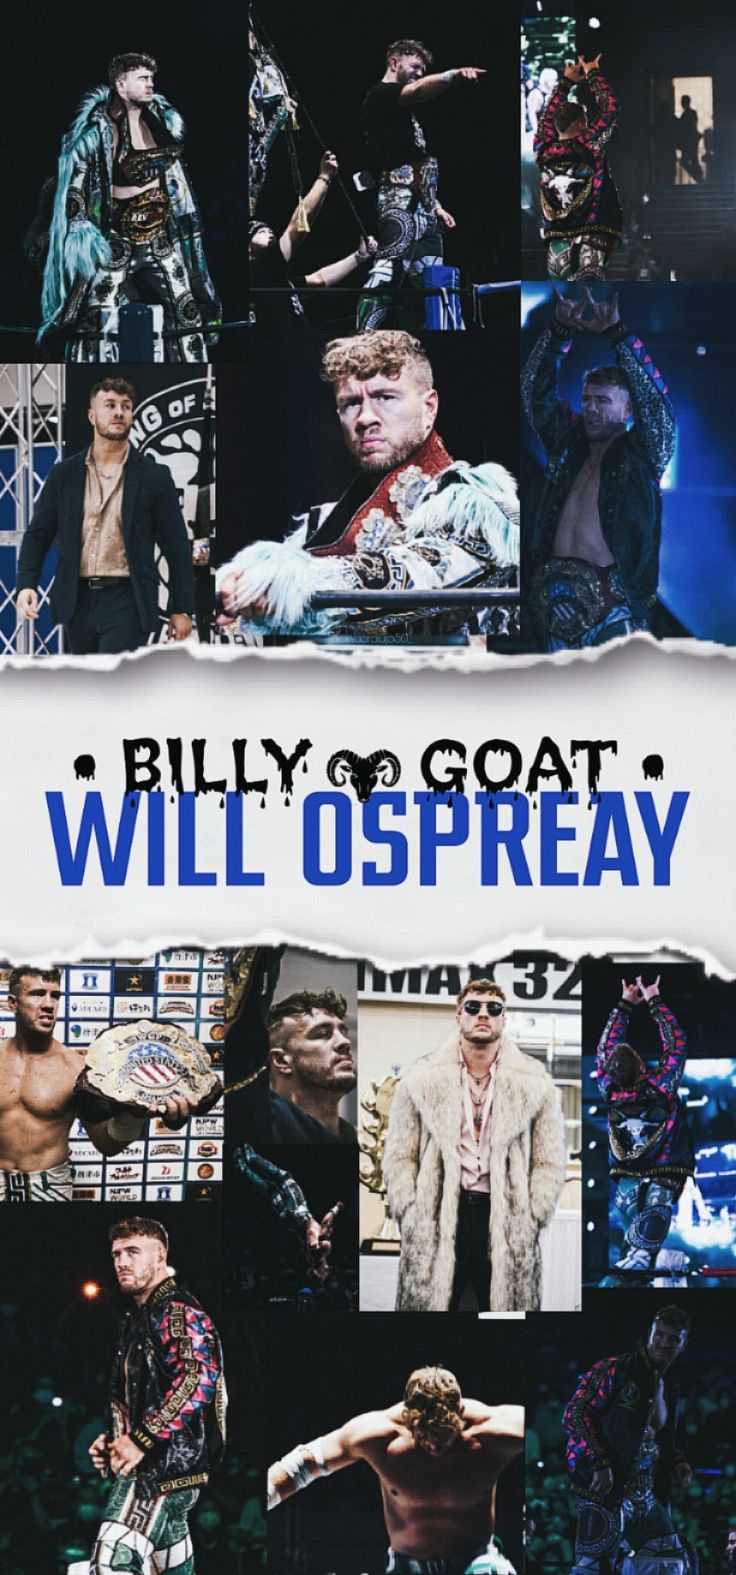 the poster for billy goat's will ospreay is shown in multiple photos